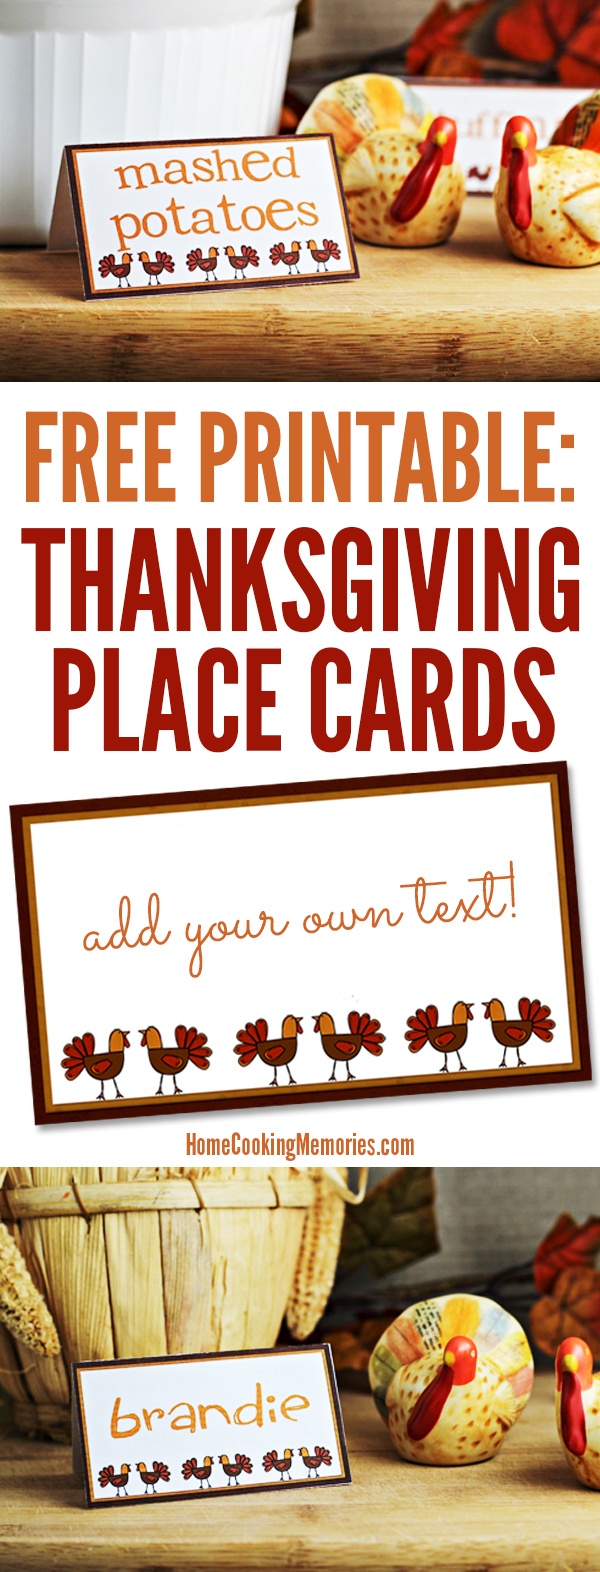 Free Printables: Thanksgiving Place Cards - Home Cooking Memories - Free Printable Thanksgiving Place Cards